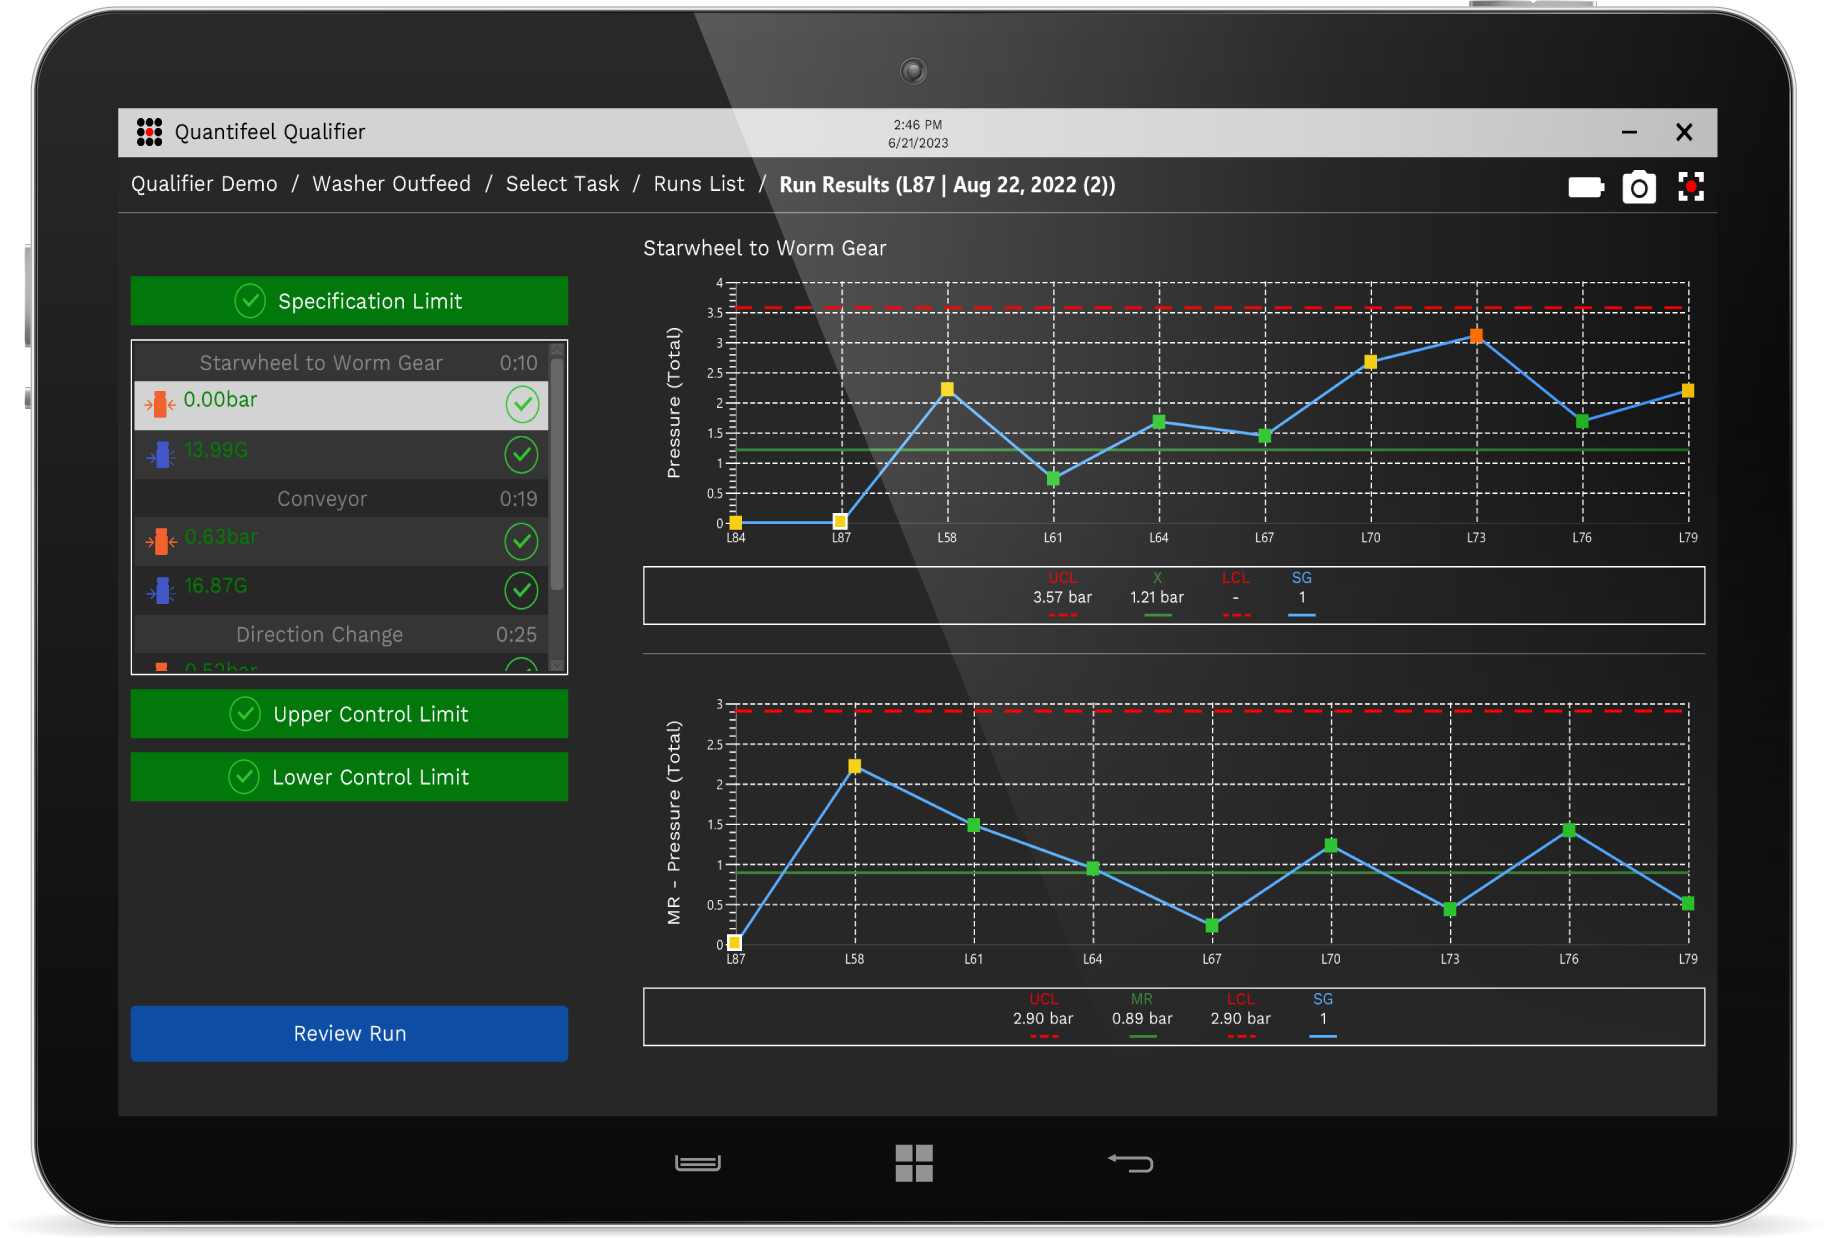 Screenshot of Quantifeel Qualifier software with control charts and in control notifications